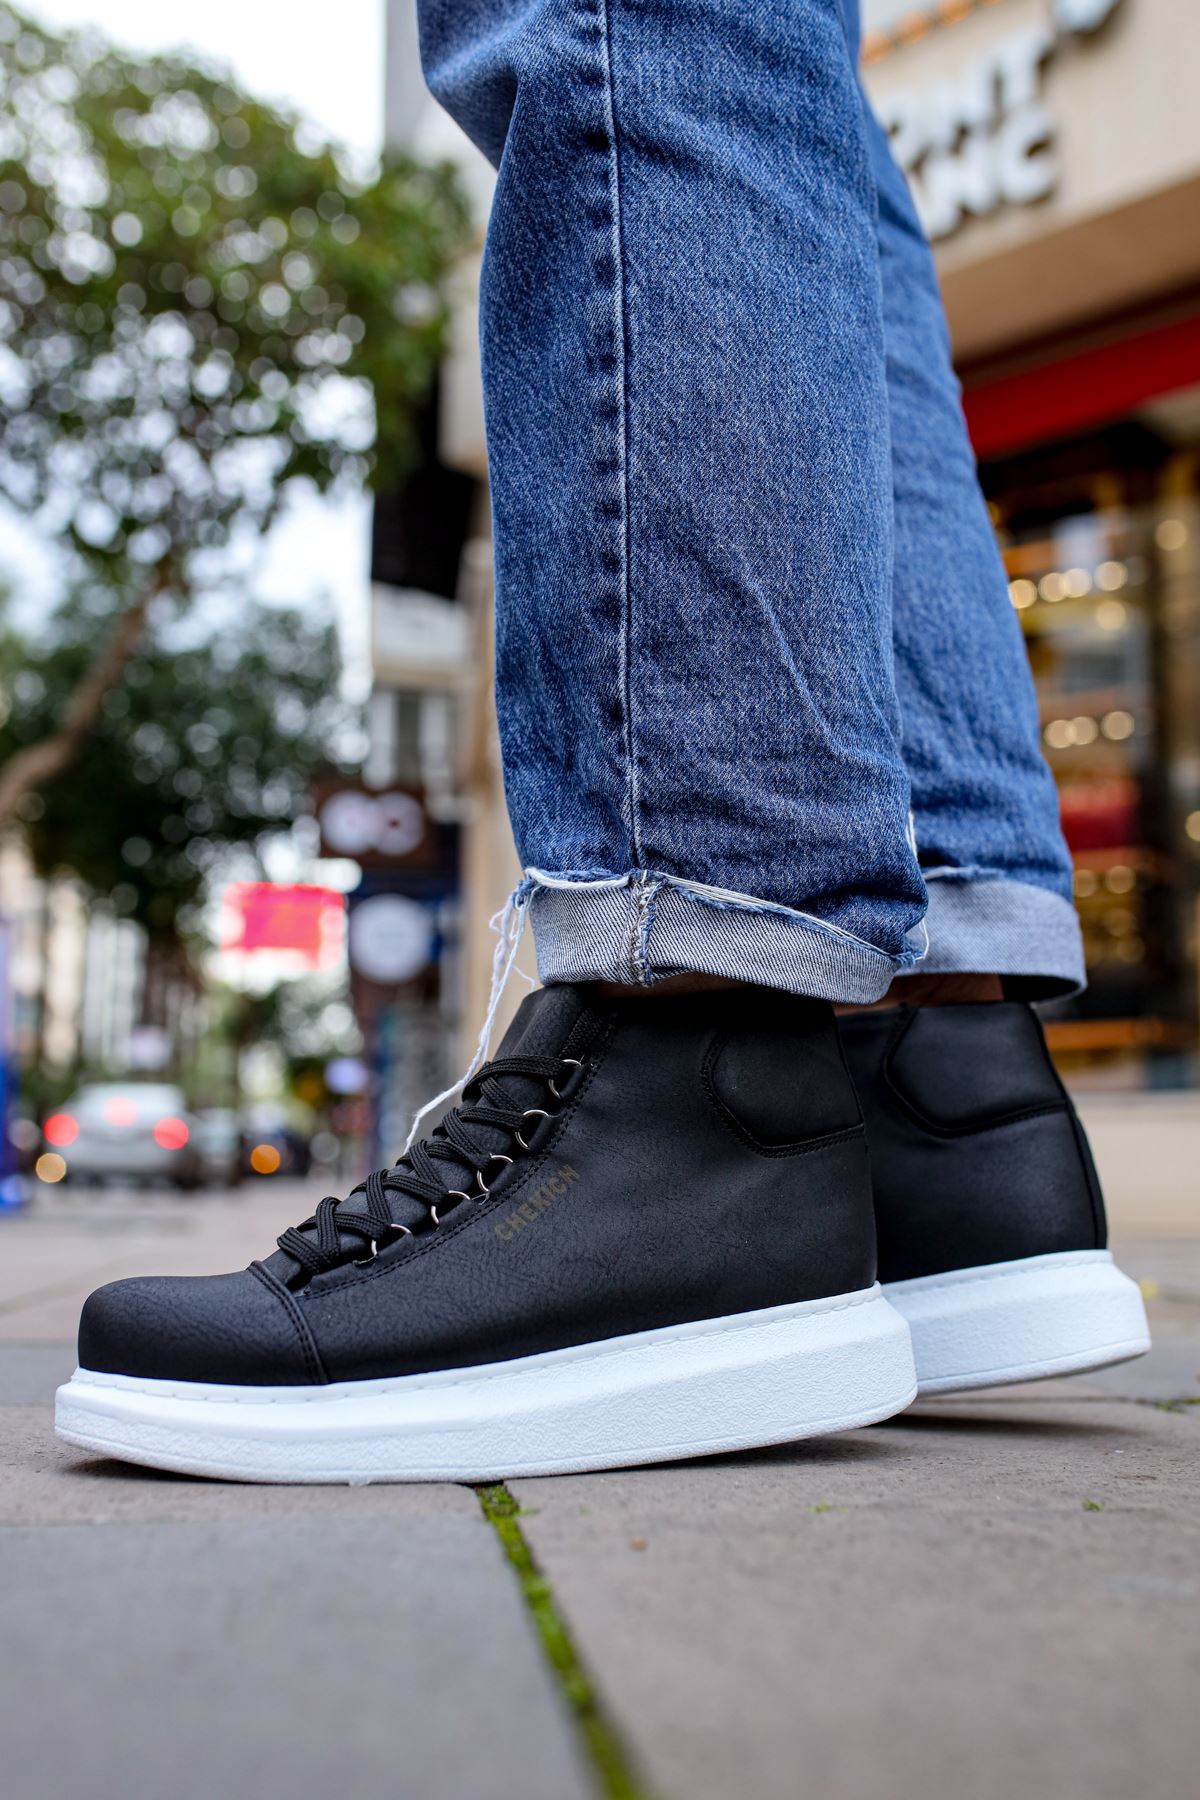 CH258 Men's Black-White Sole Metal Slug Lace-up High Sole Casual Sneaker Sports Boots - STREETMODE ™